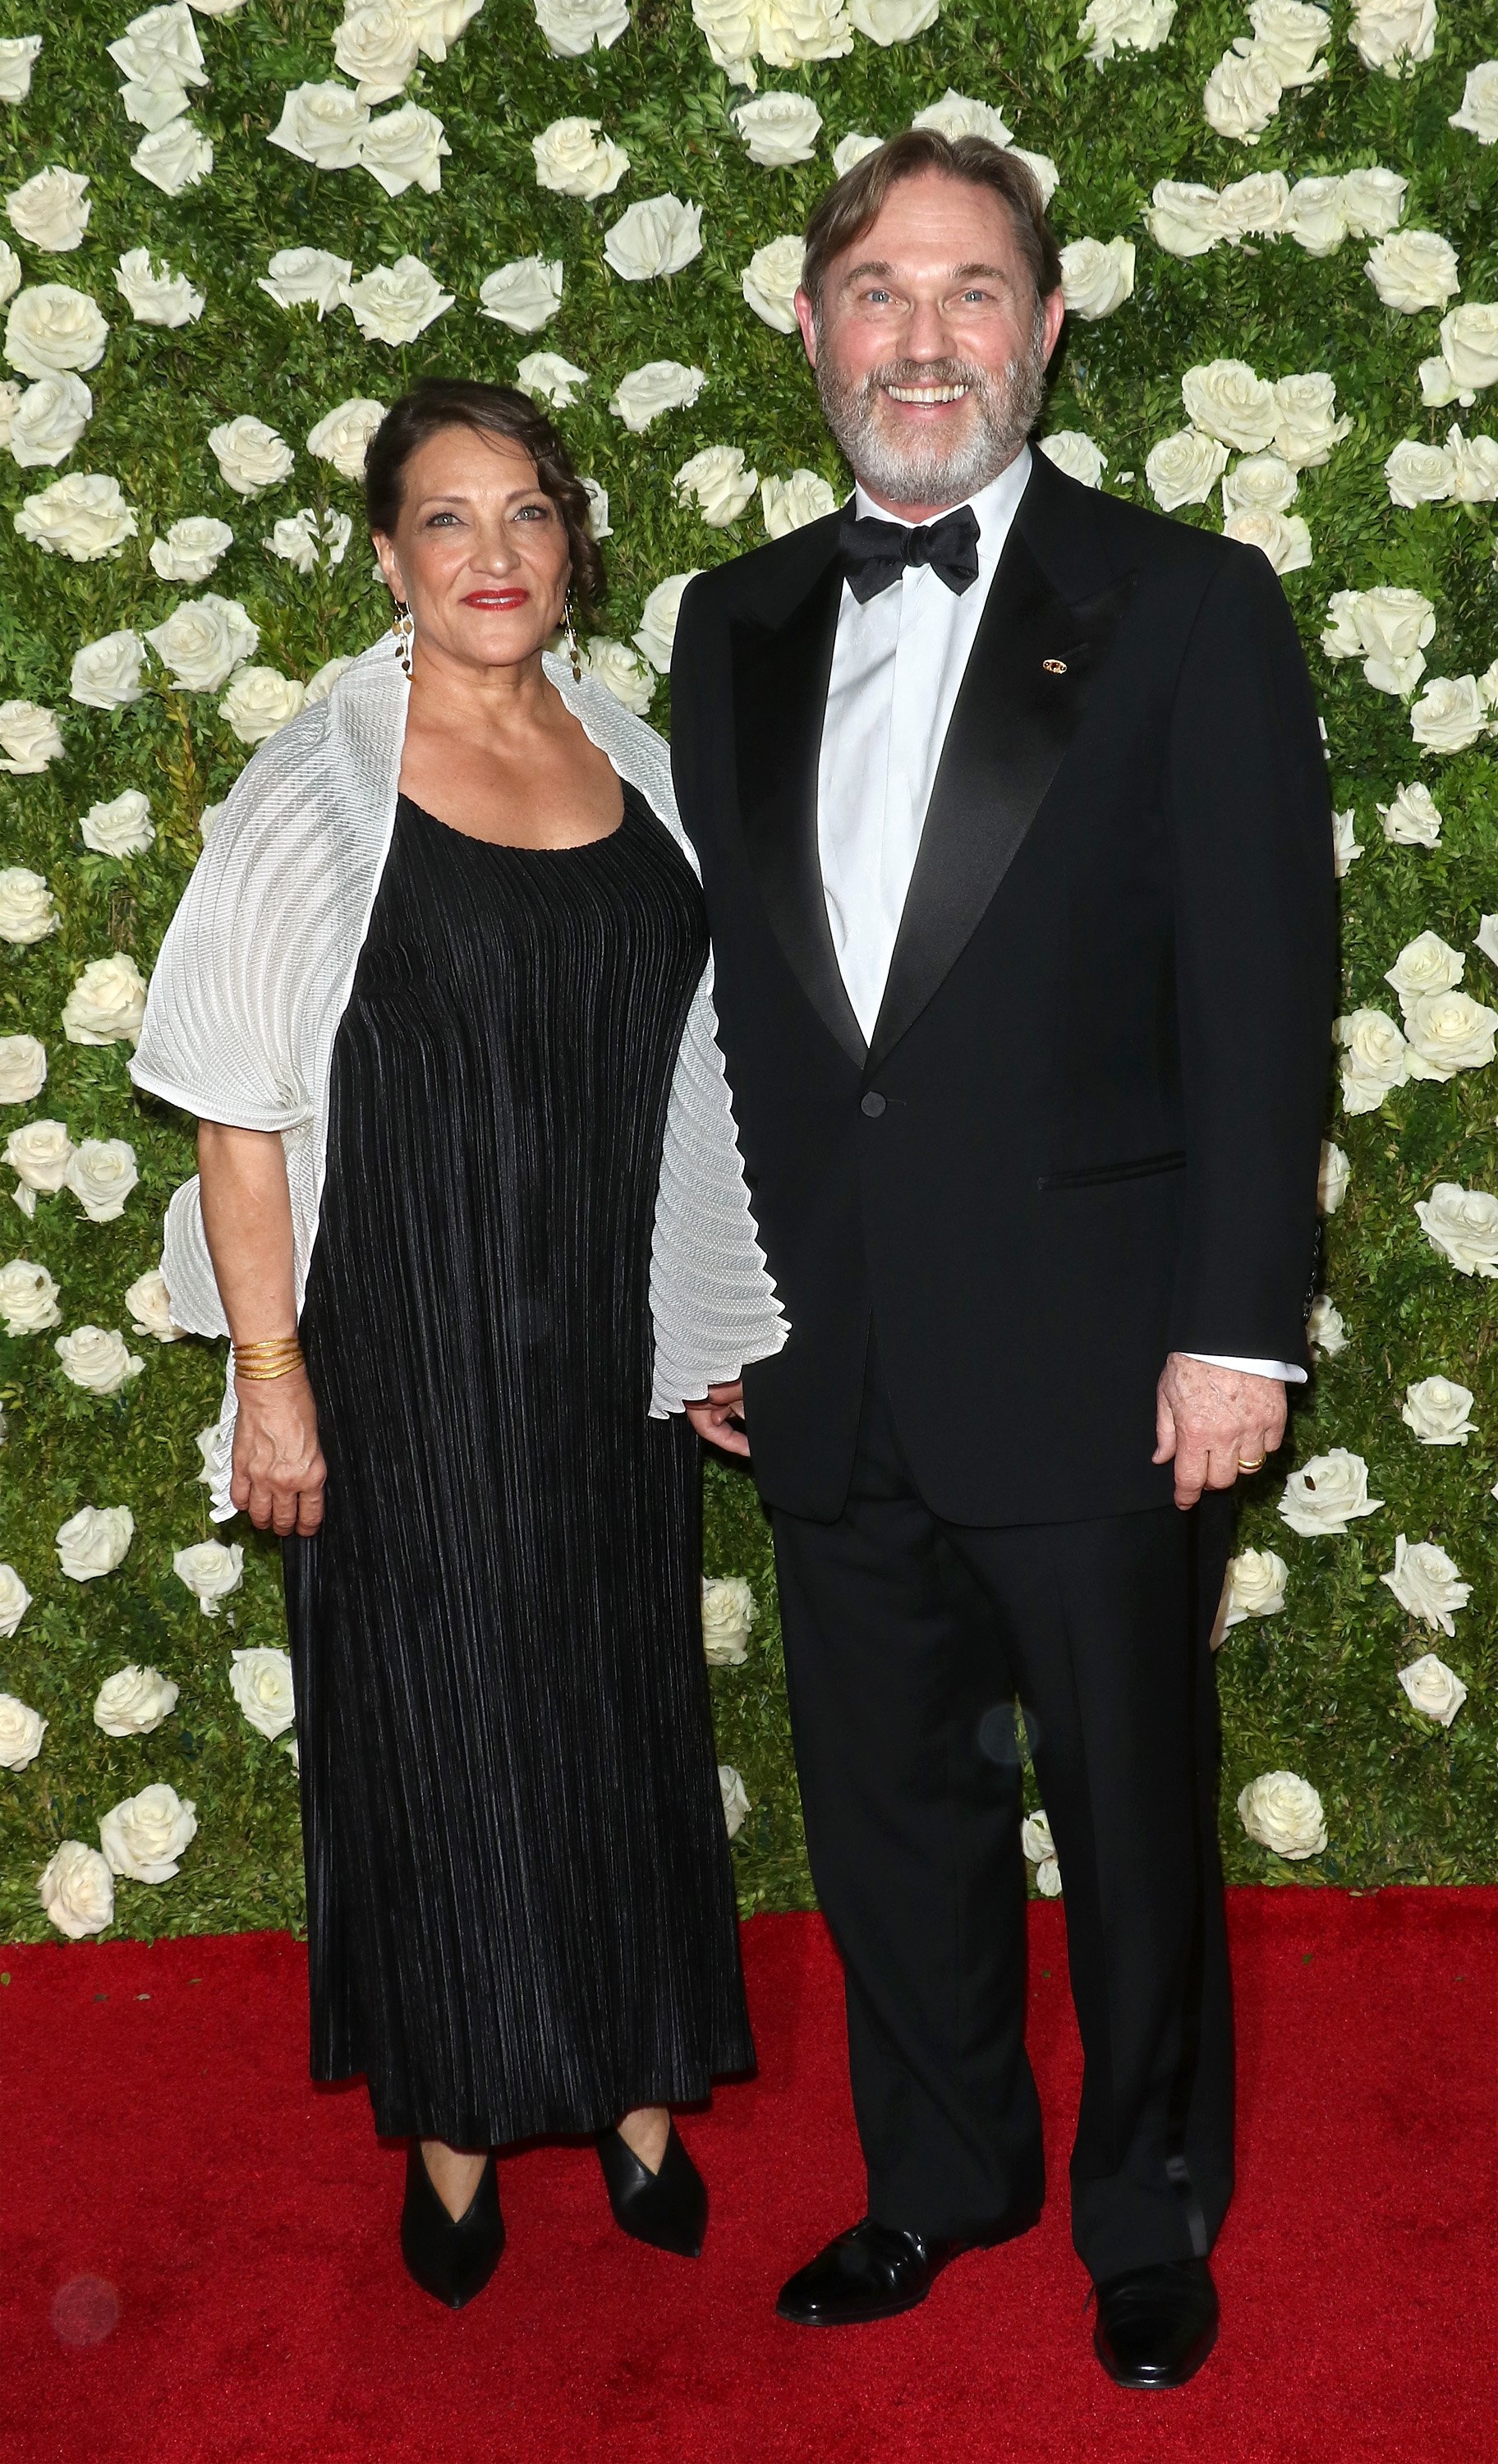 Georgiana Bischoff and Richard Thomas attend the 71st Annual Tony Awards on June 11, 2017 in New York City.| Photo: Getty Images